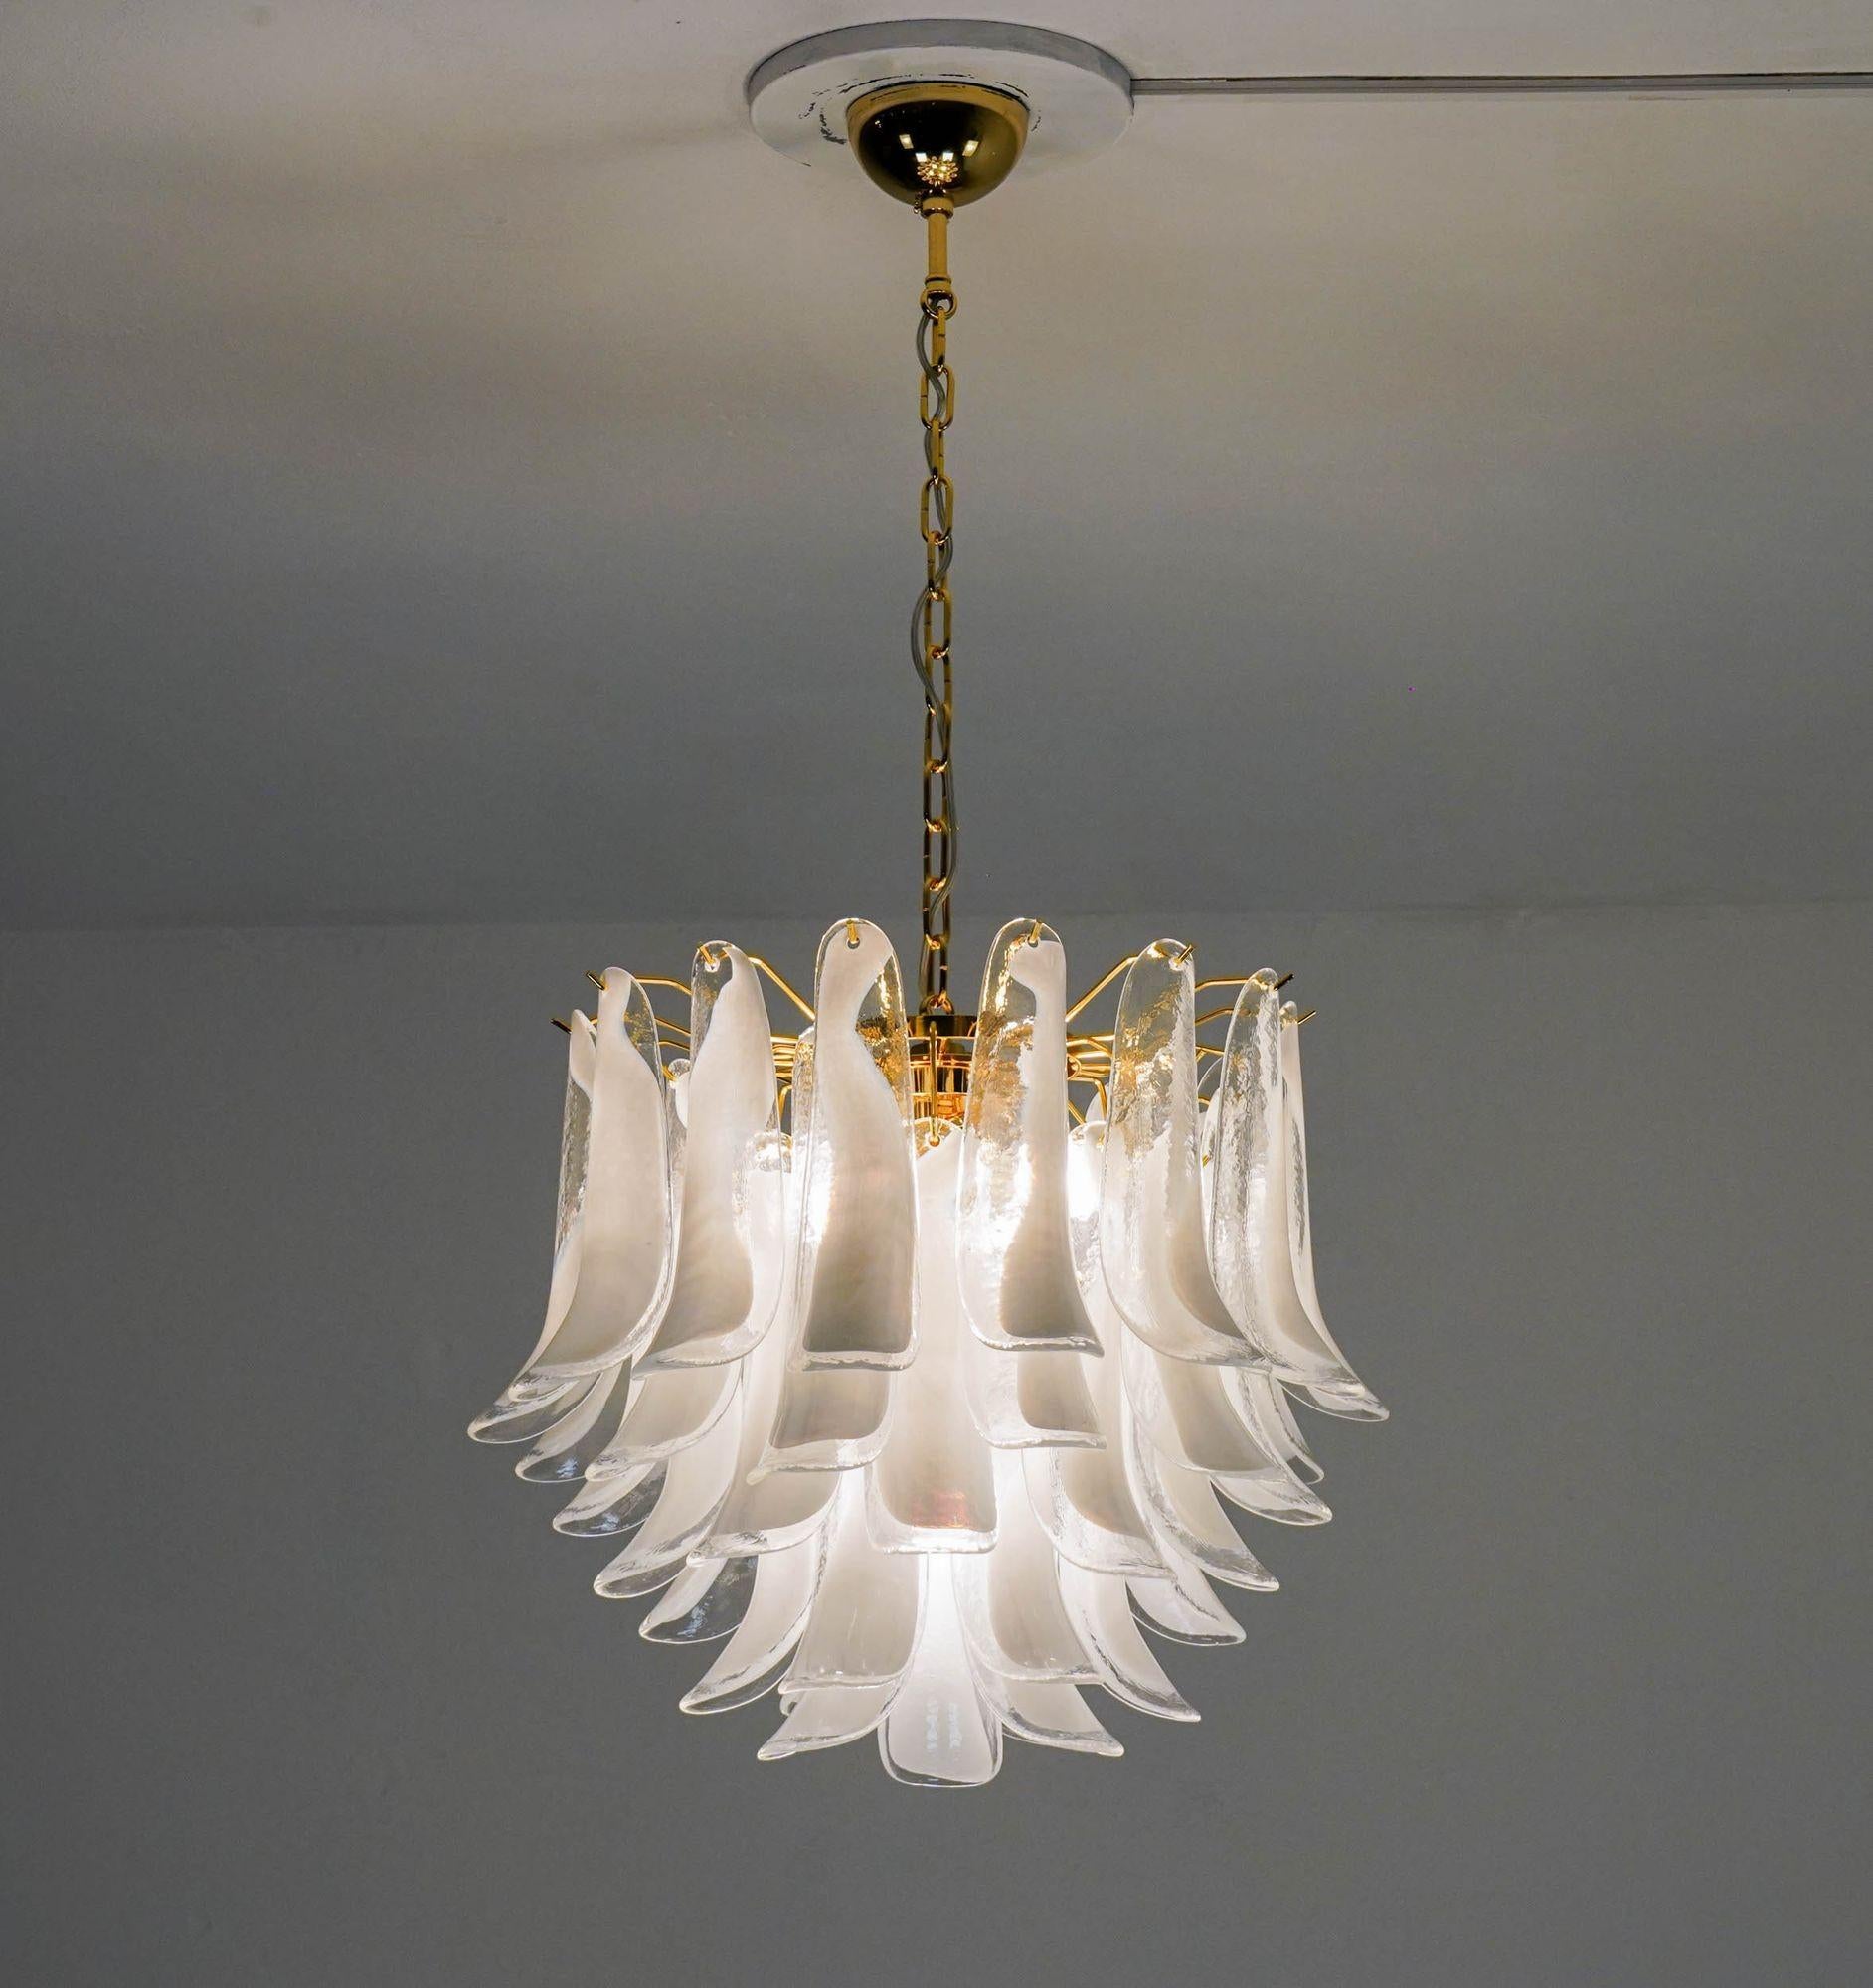 Drawing on decades of experience in lighting, my aim was to fashion a chandelier that seamlessly marries timeless elegance with practicality.

To assure buyers' peace of mind and facilitate public space usage, the chandelier will be wired and UL